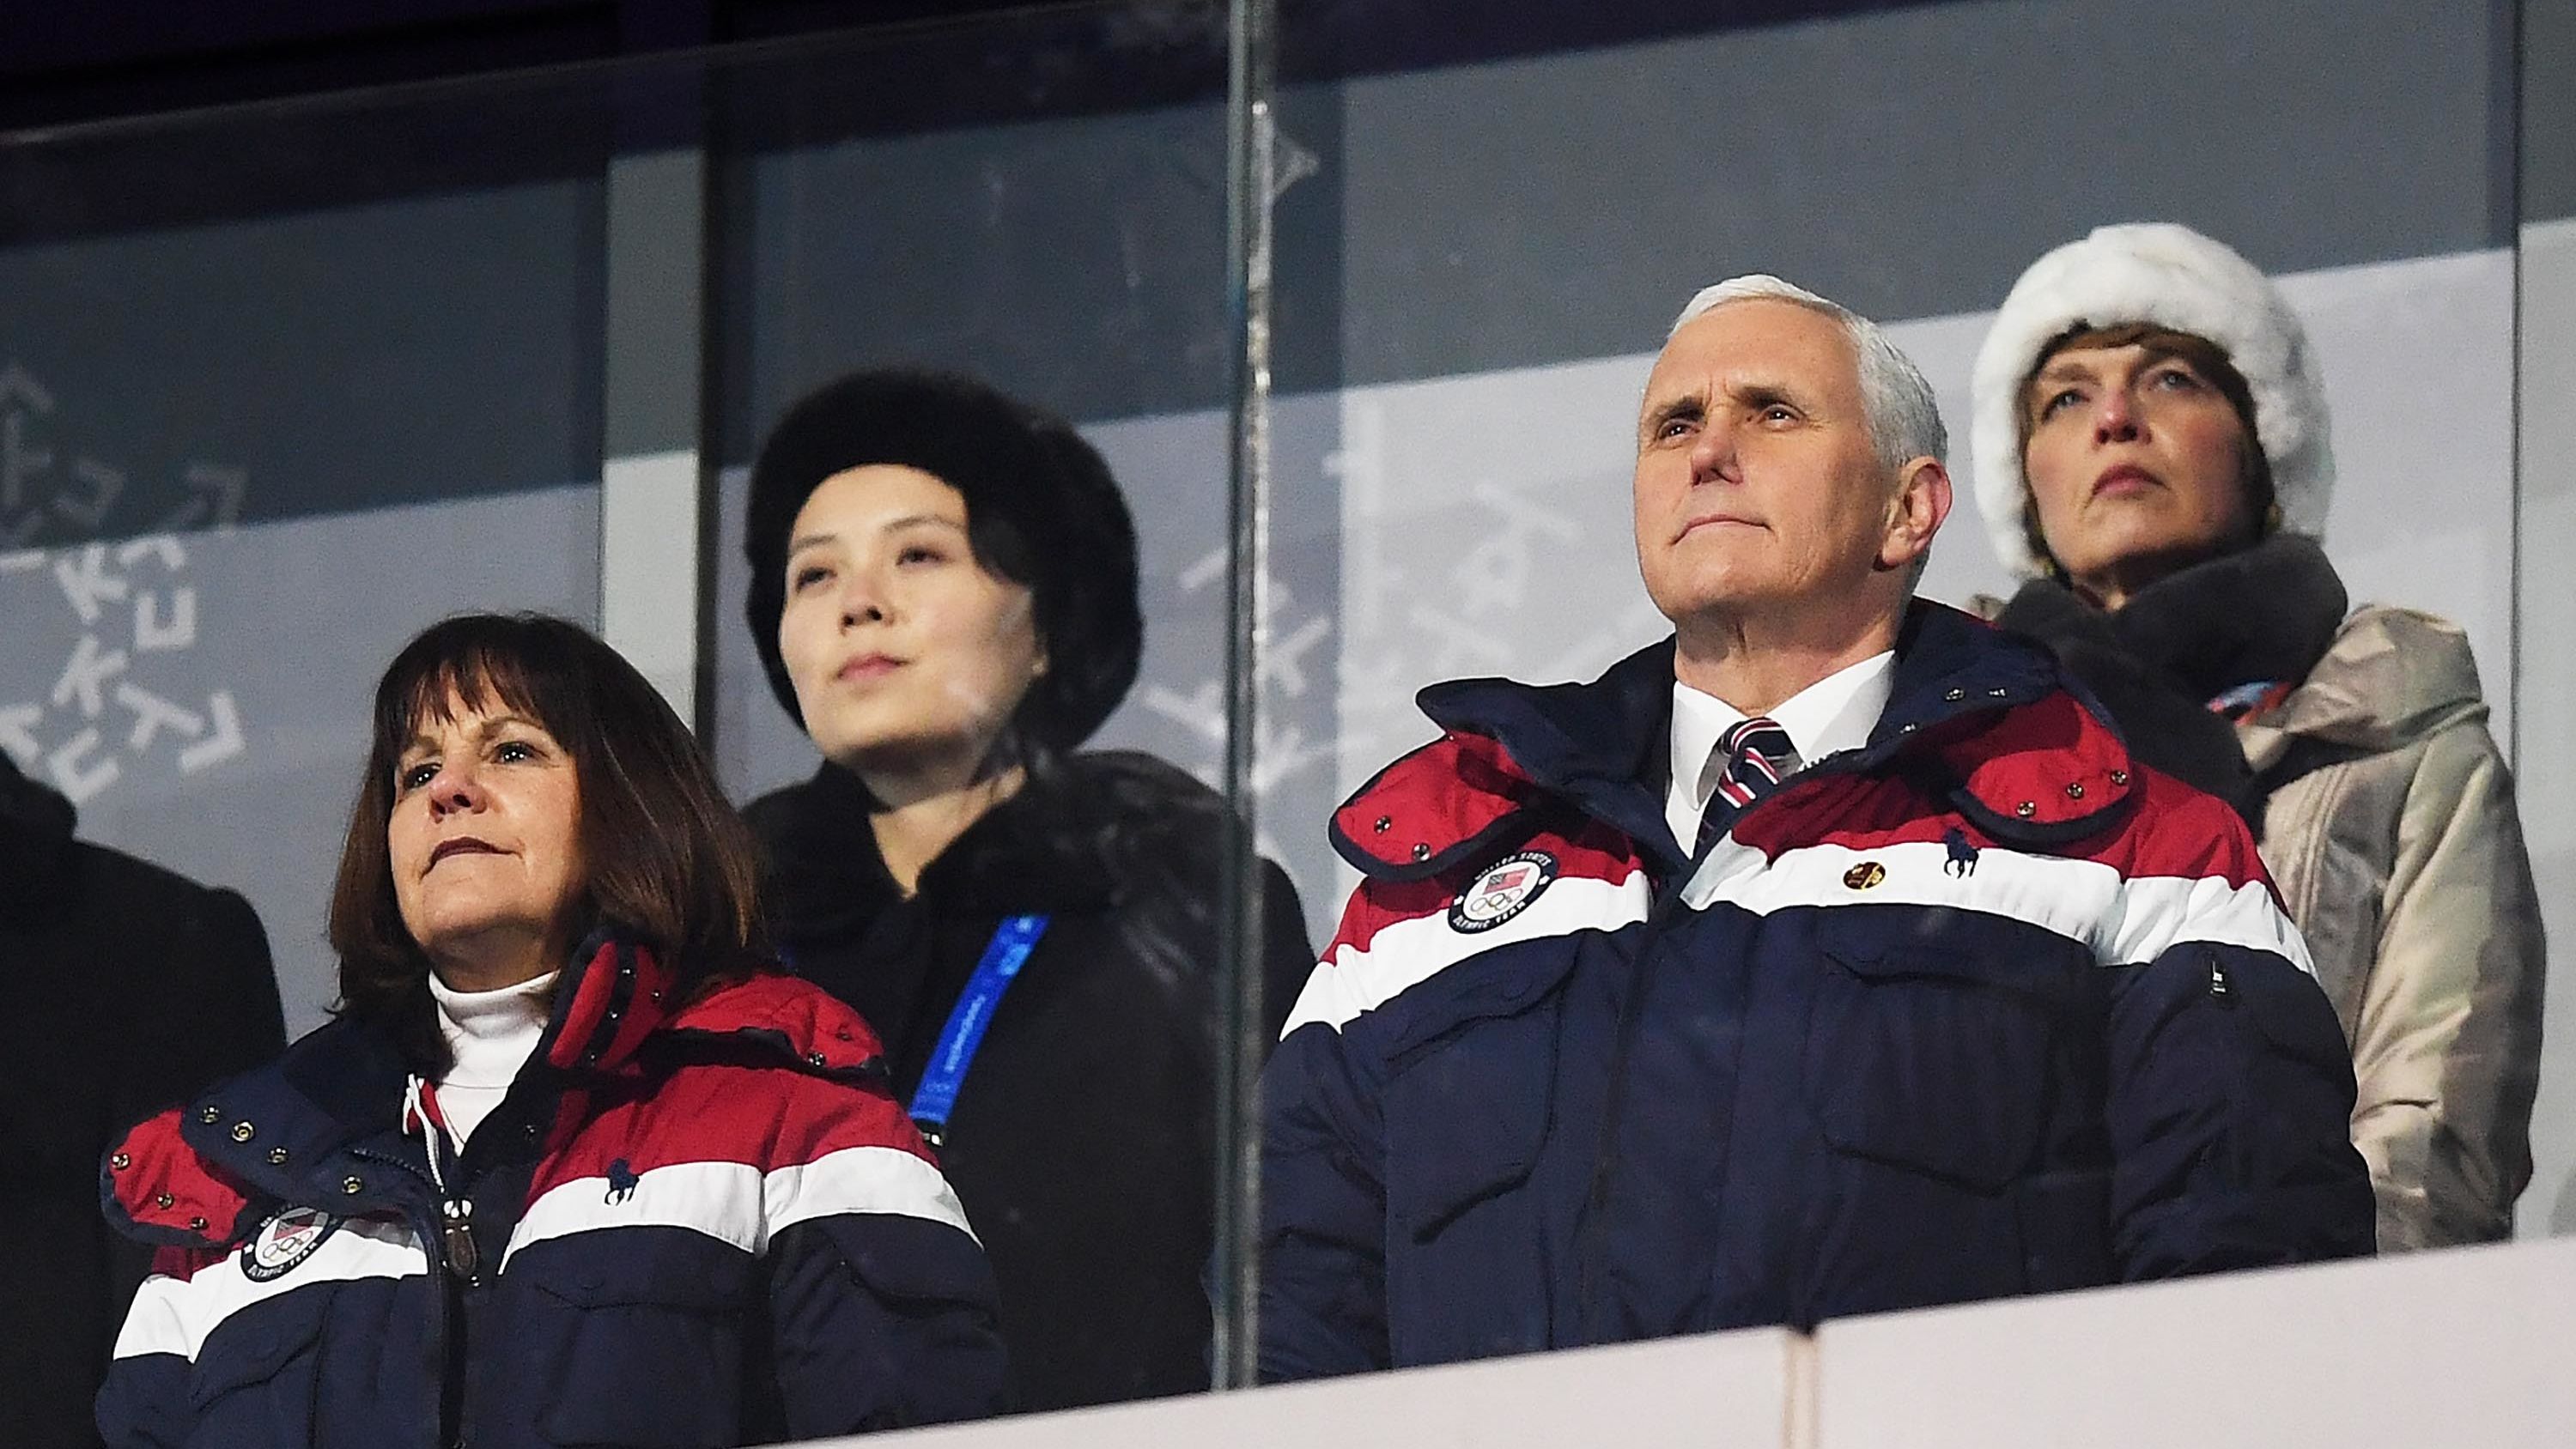 Pence and his wife, Karen, attend the opening ceremony of the Winter Olympics in Pyeongchang, South Korea, in February 2018. Kim Yo Jong, the sister of North Korean leader Kim Jong Un, is seated at back left.